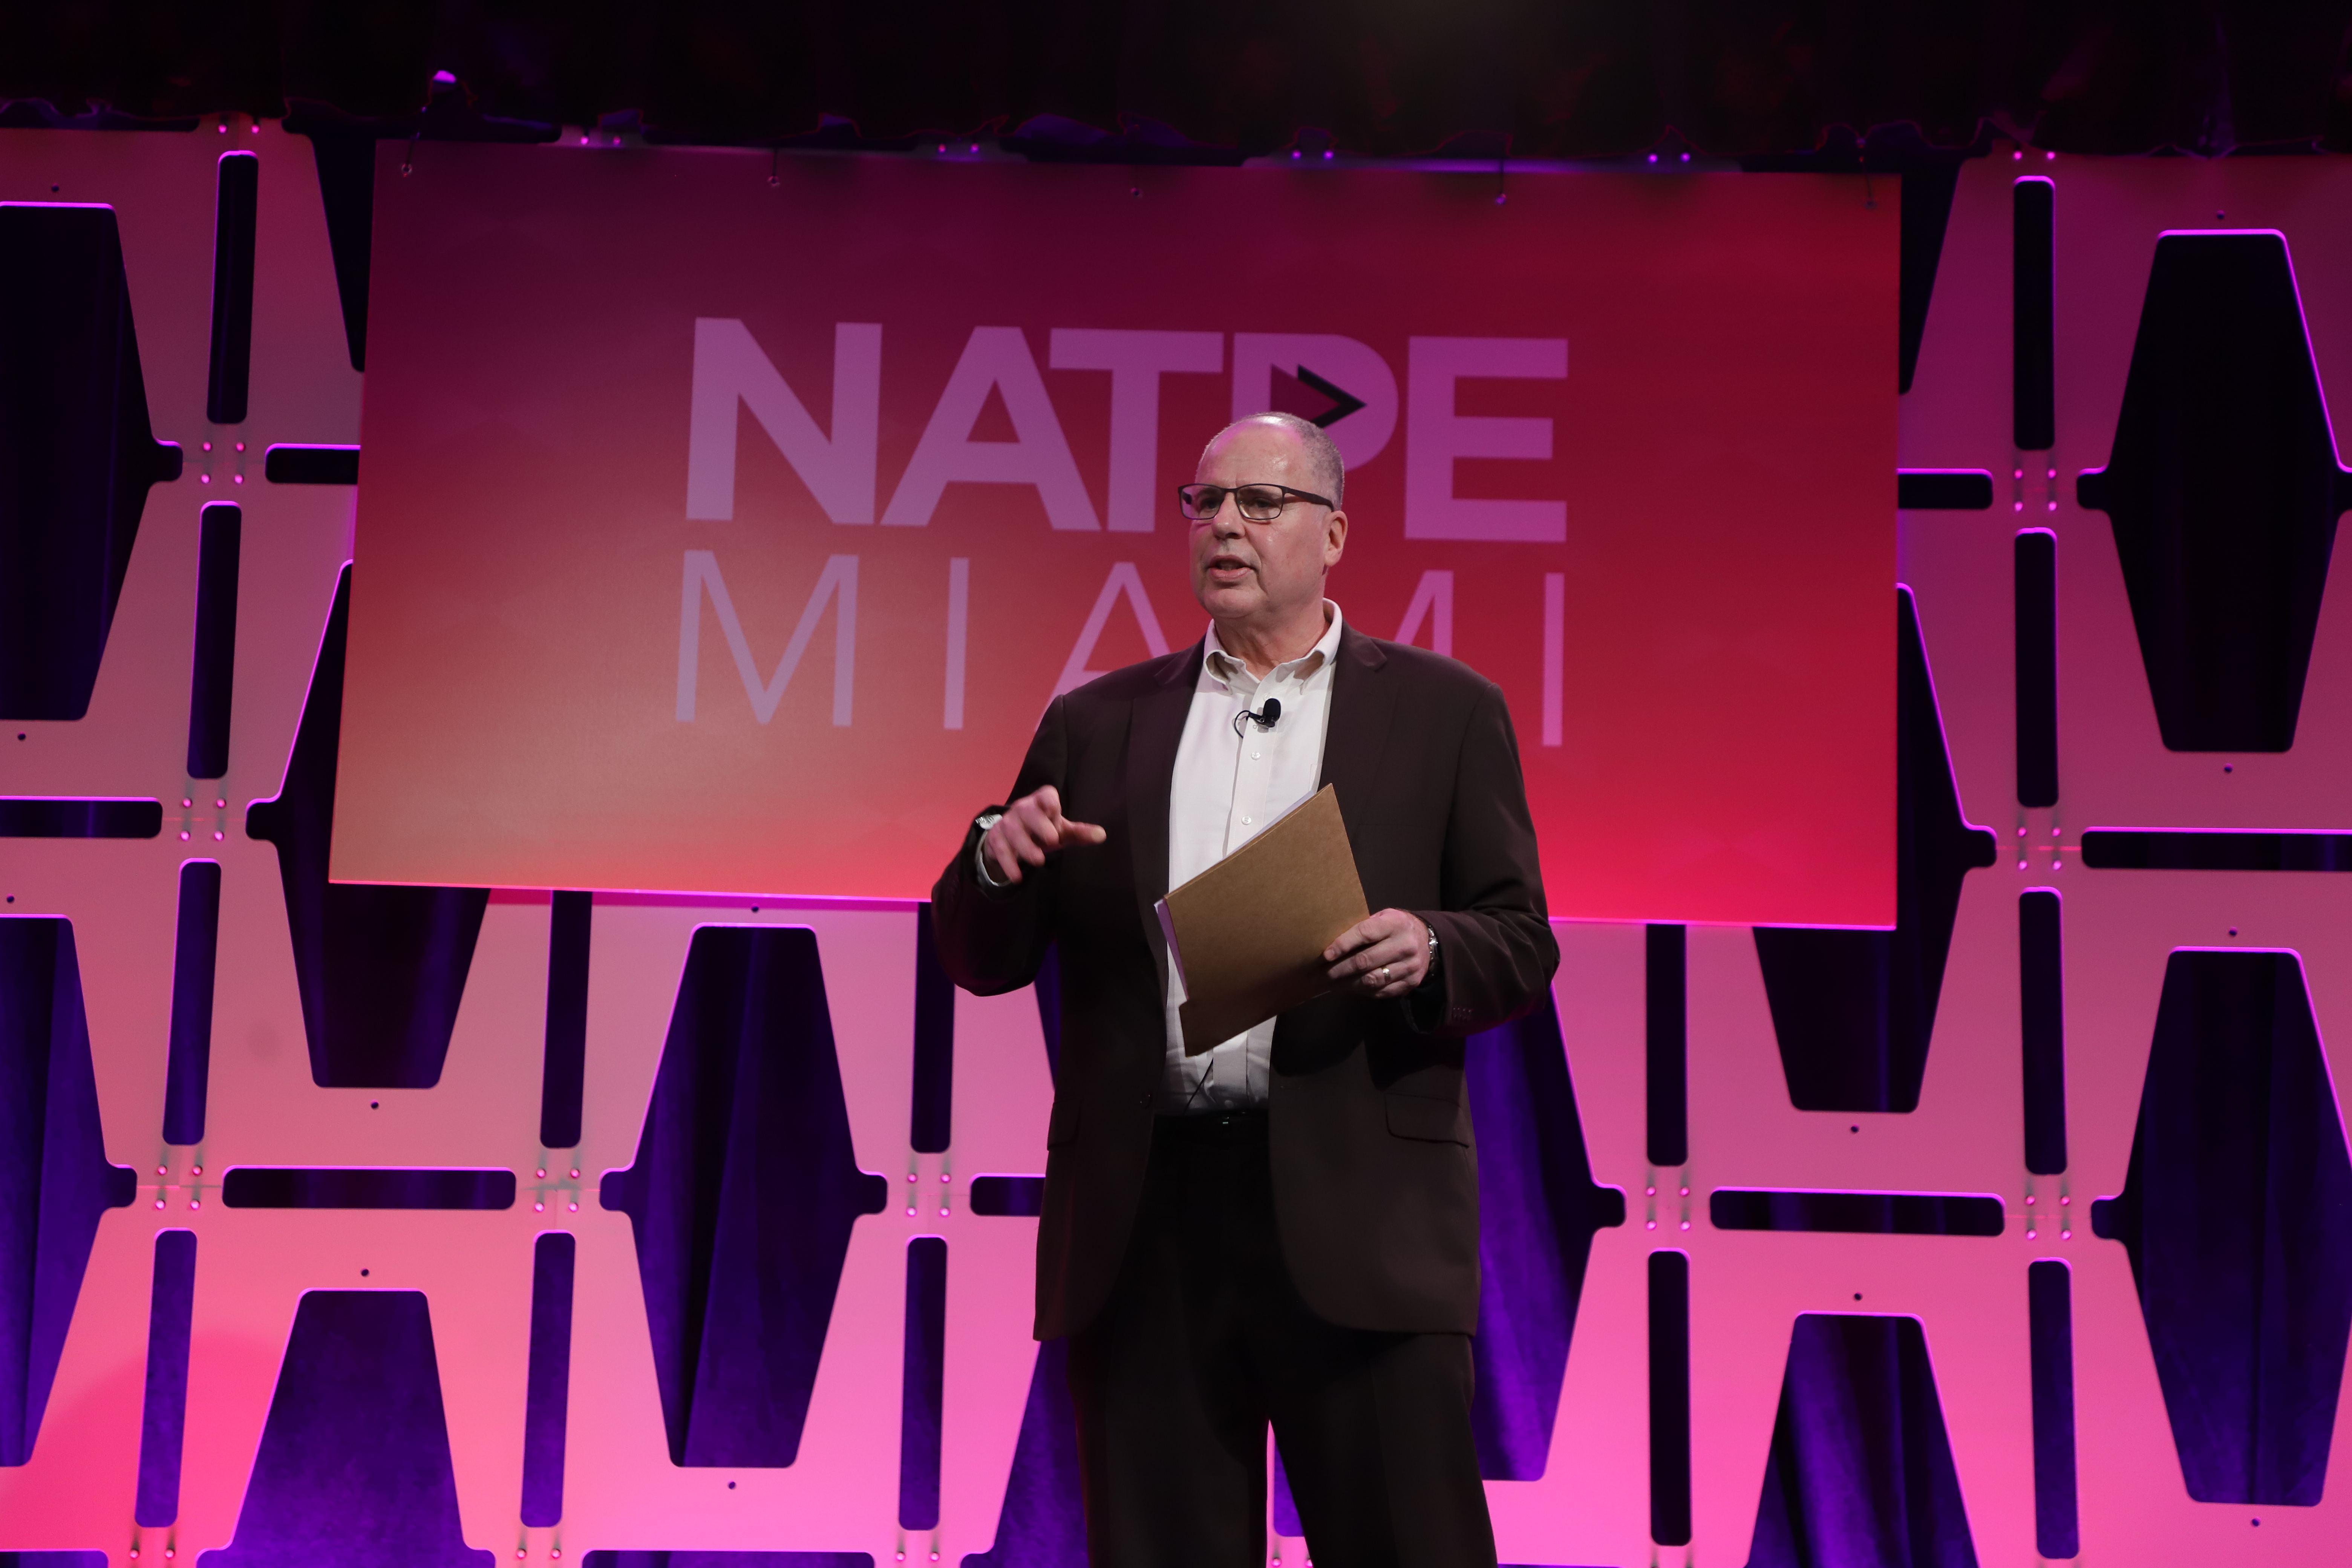 Marc Berman, founder and Editor-In-Chief for Programming Insider, introduces the Global TV Demand Awards at NATPE Miami. (Photo by John Parra/Getty Images for Parrot Analytics)